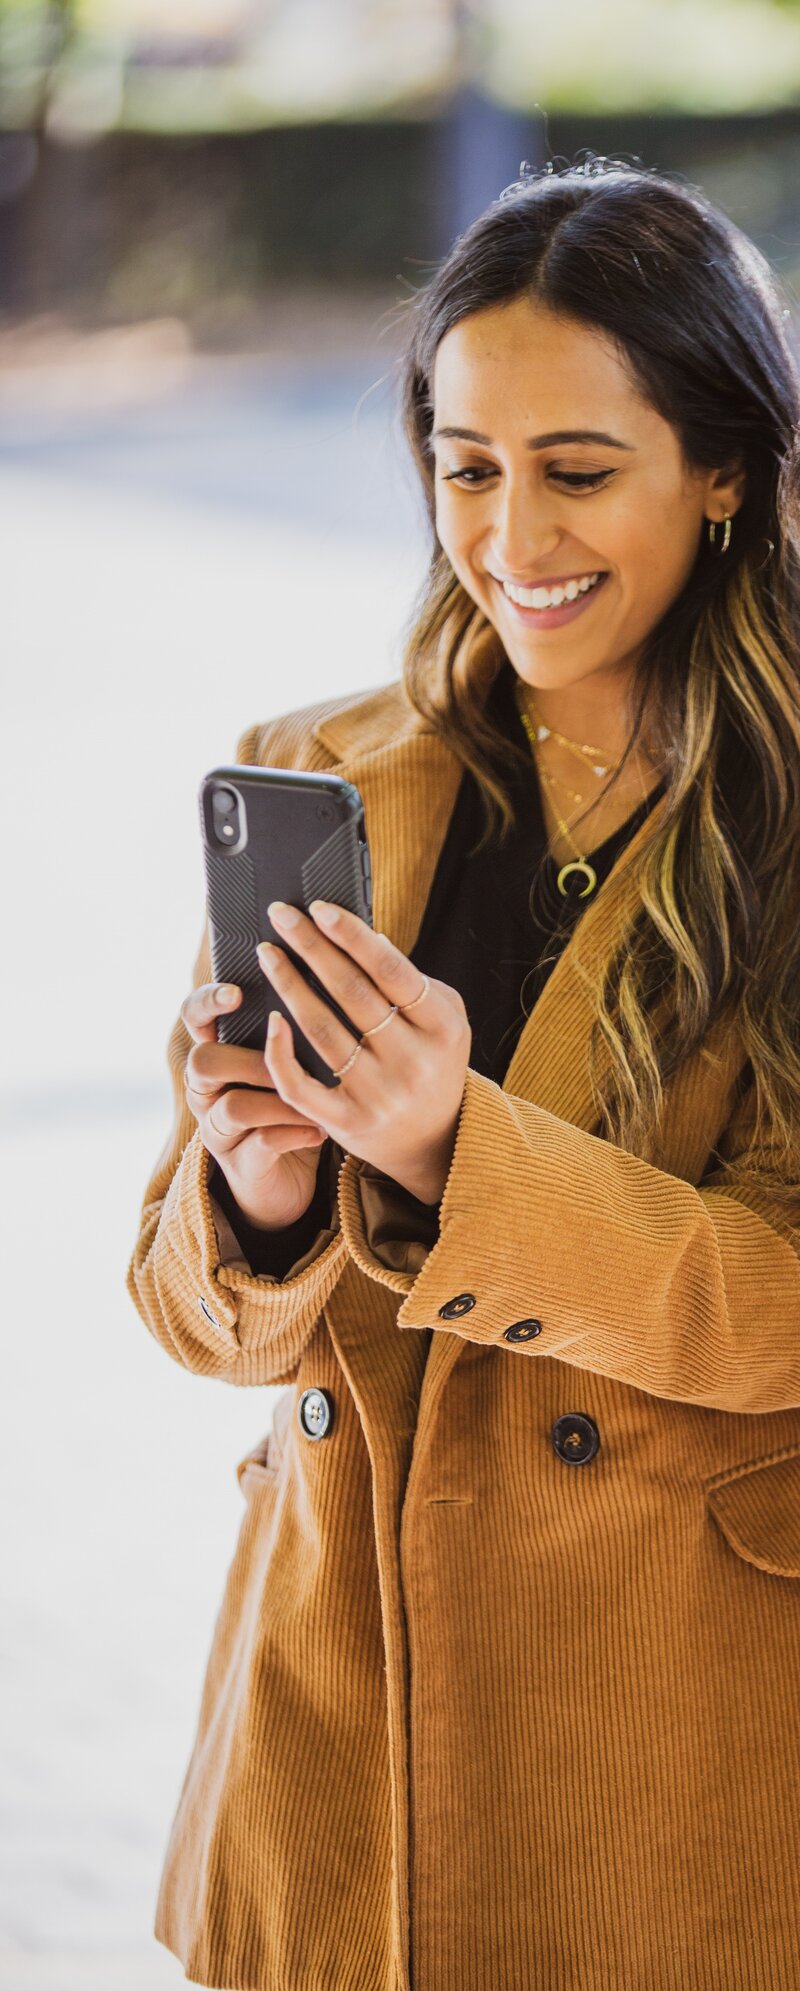 photo-of-woman-holding-smartphone-3179215 solo